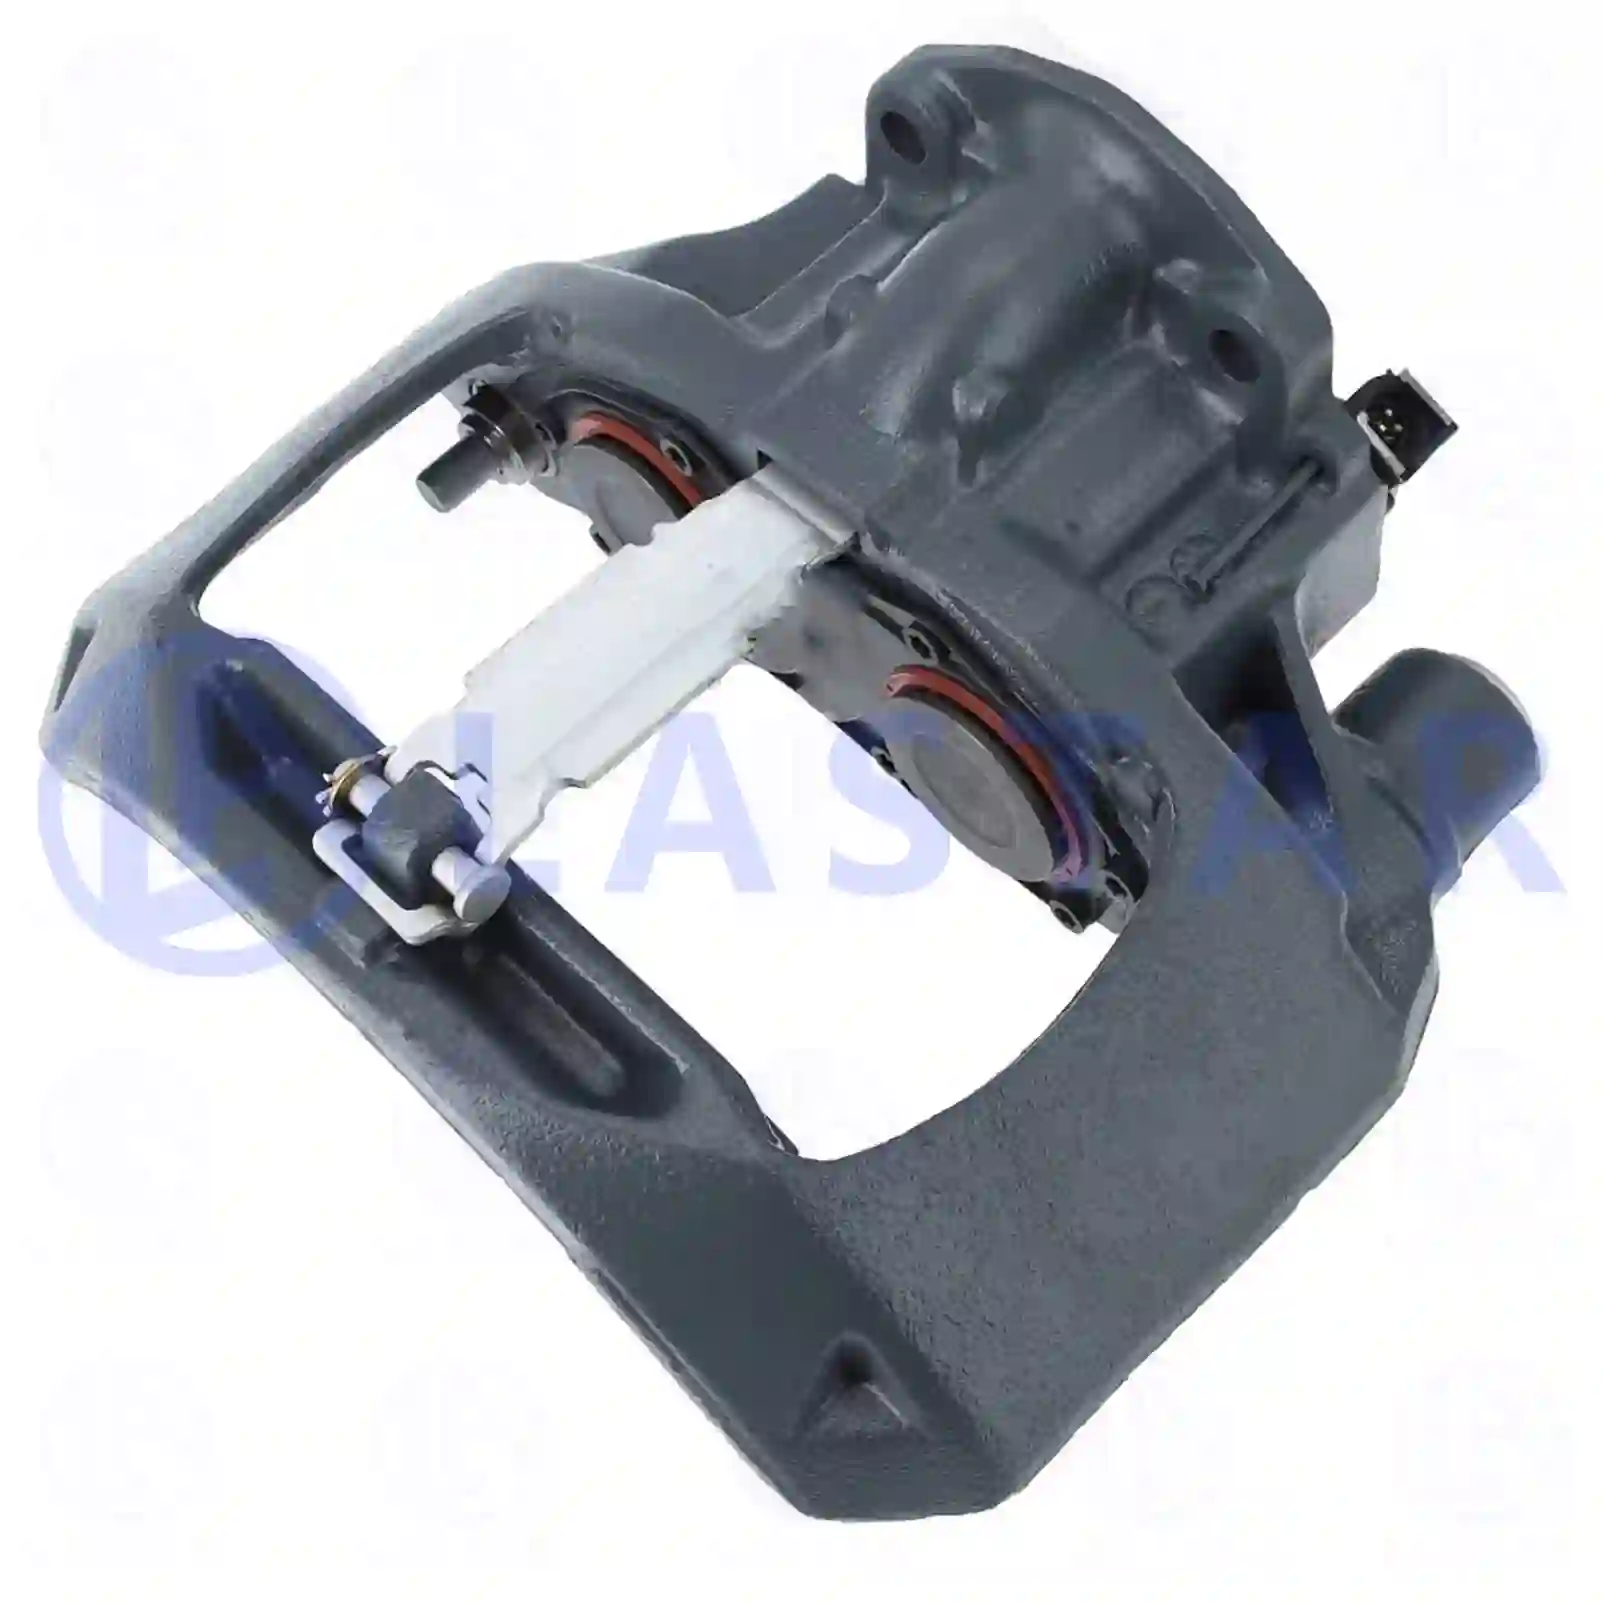 Brake caliper, reman. / without old core, 77714020, 1658011, 1857921, 1978636, ZG50137-0008 ||  77714020 Lastar Spare Part | Truck Spare Parts, Auotomotive Spare Parts Brake caliper, reman. / without old core, 77714020, 1658011, 1857921, 1978636, ZG50137-0008 ||  77714020 Lastar Spare Part | Truck Spare Parts, Auotomotive Spare Parts